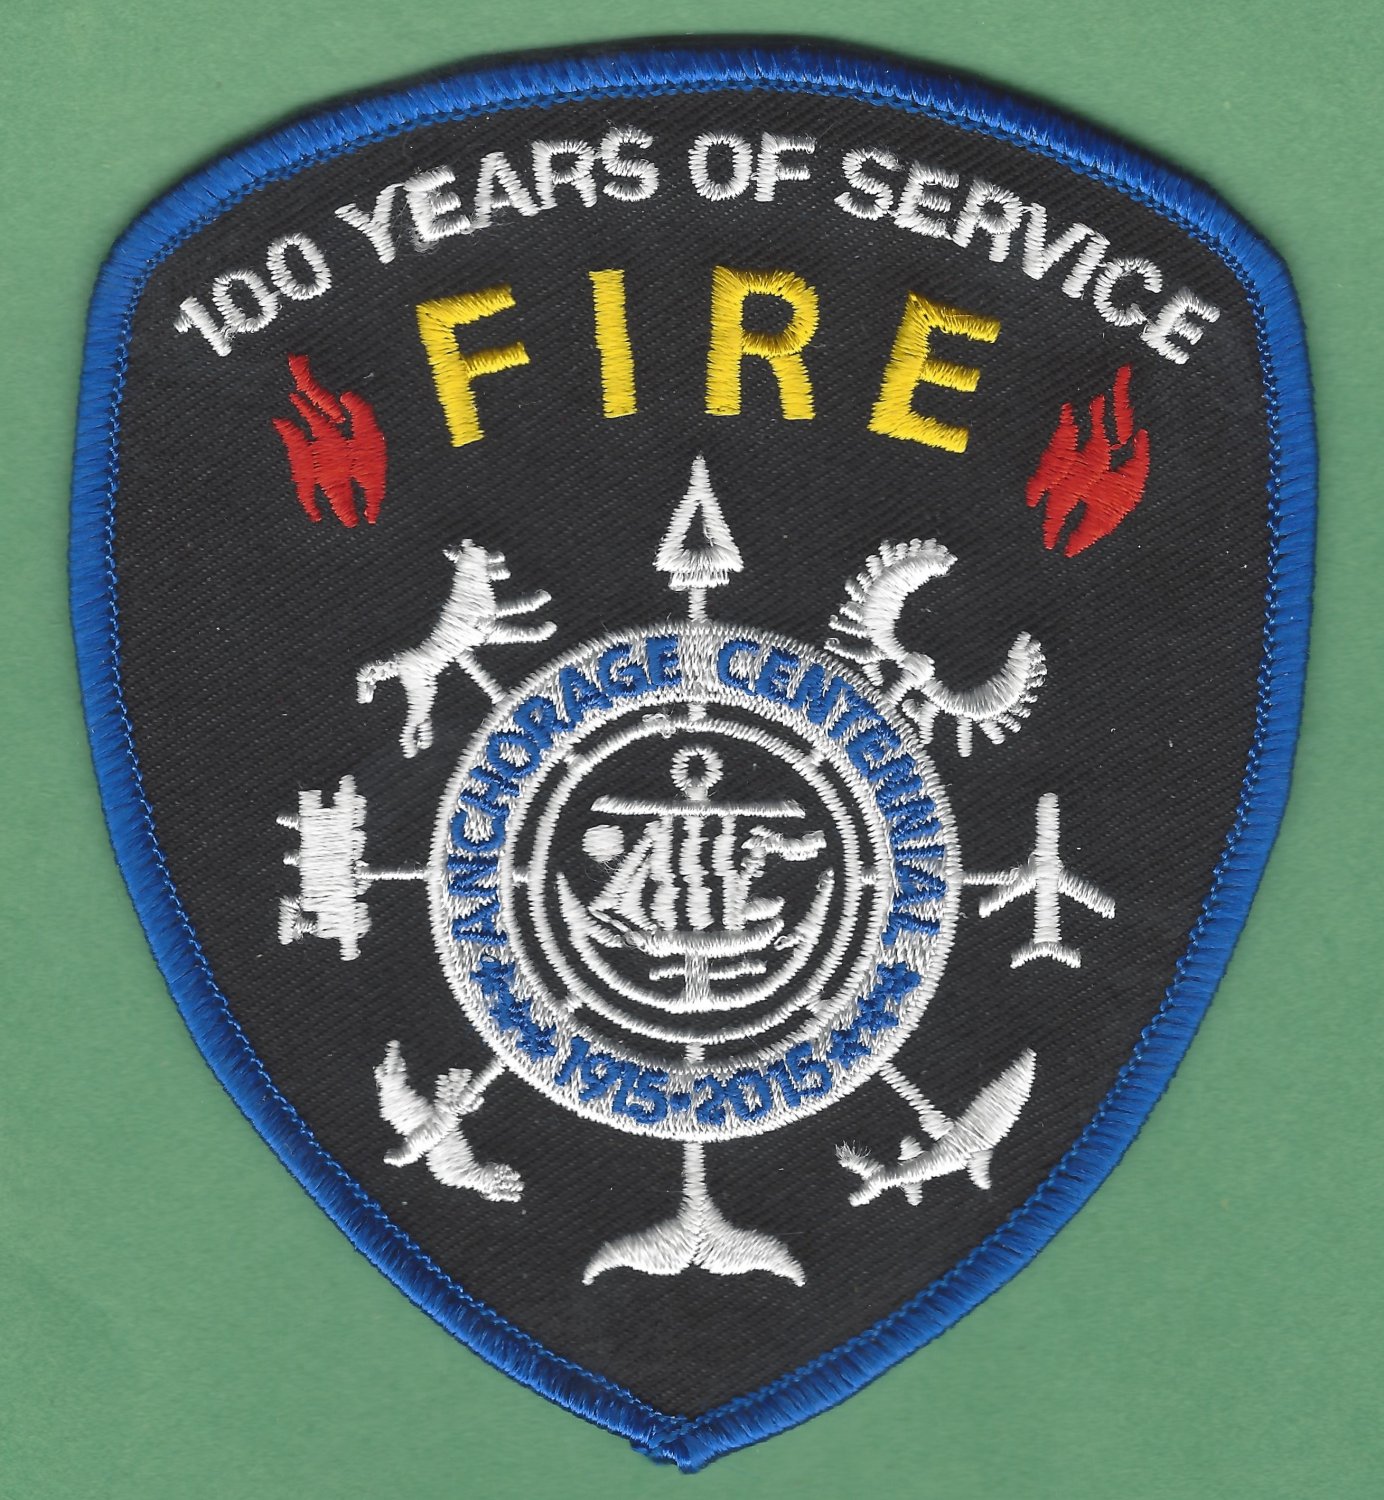 Anchorage Alaska Fire Rescue Patch 100 Years of Service1384 x 1500